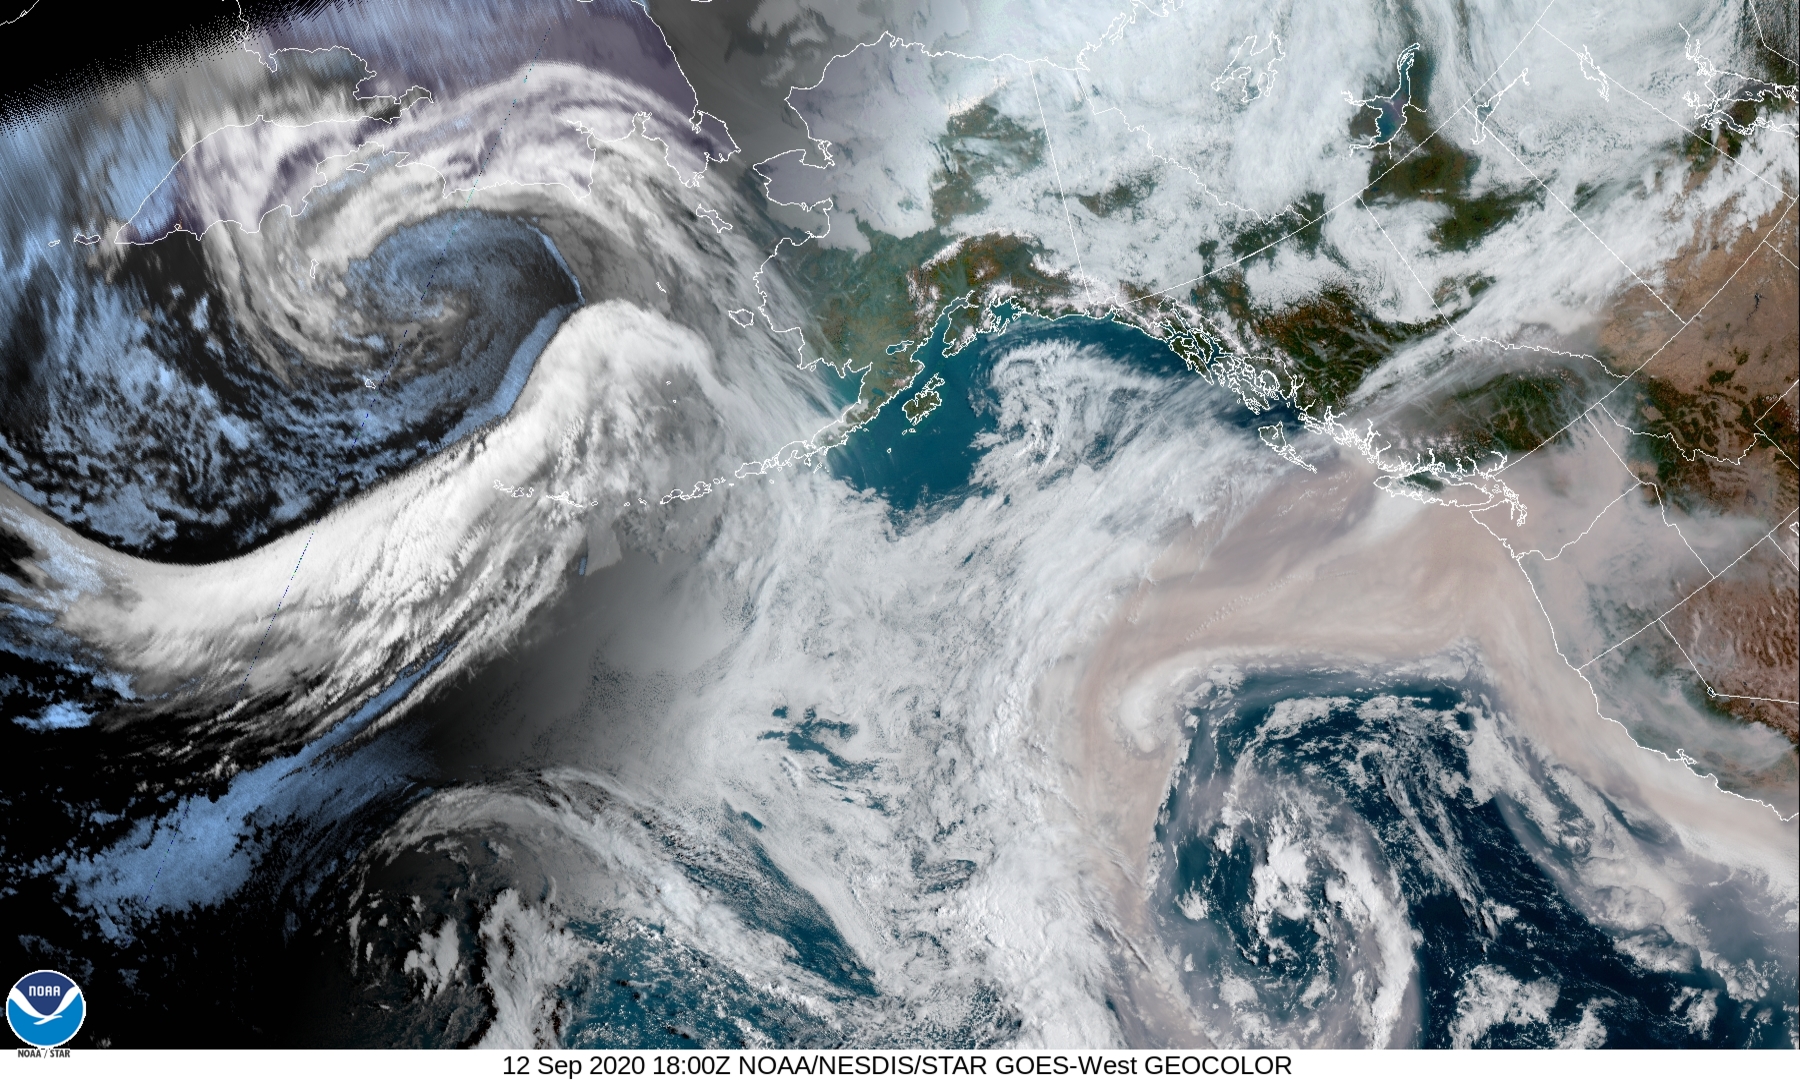 A satellite image of the Northeast Pacific taken by the U.S. National Oceanic and Atmospheric Administration (NOAA) on Sept. 12. (NOAA)